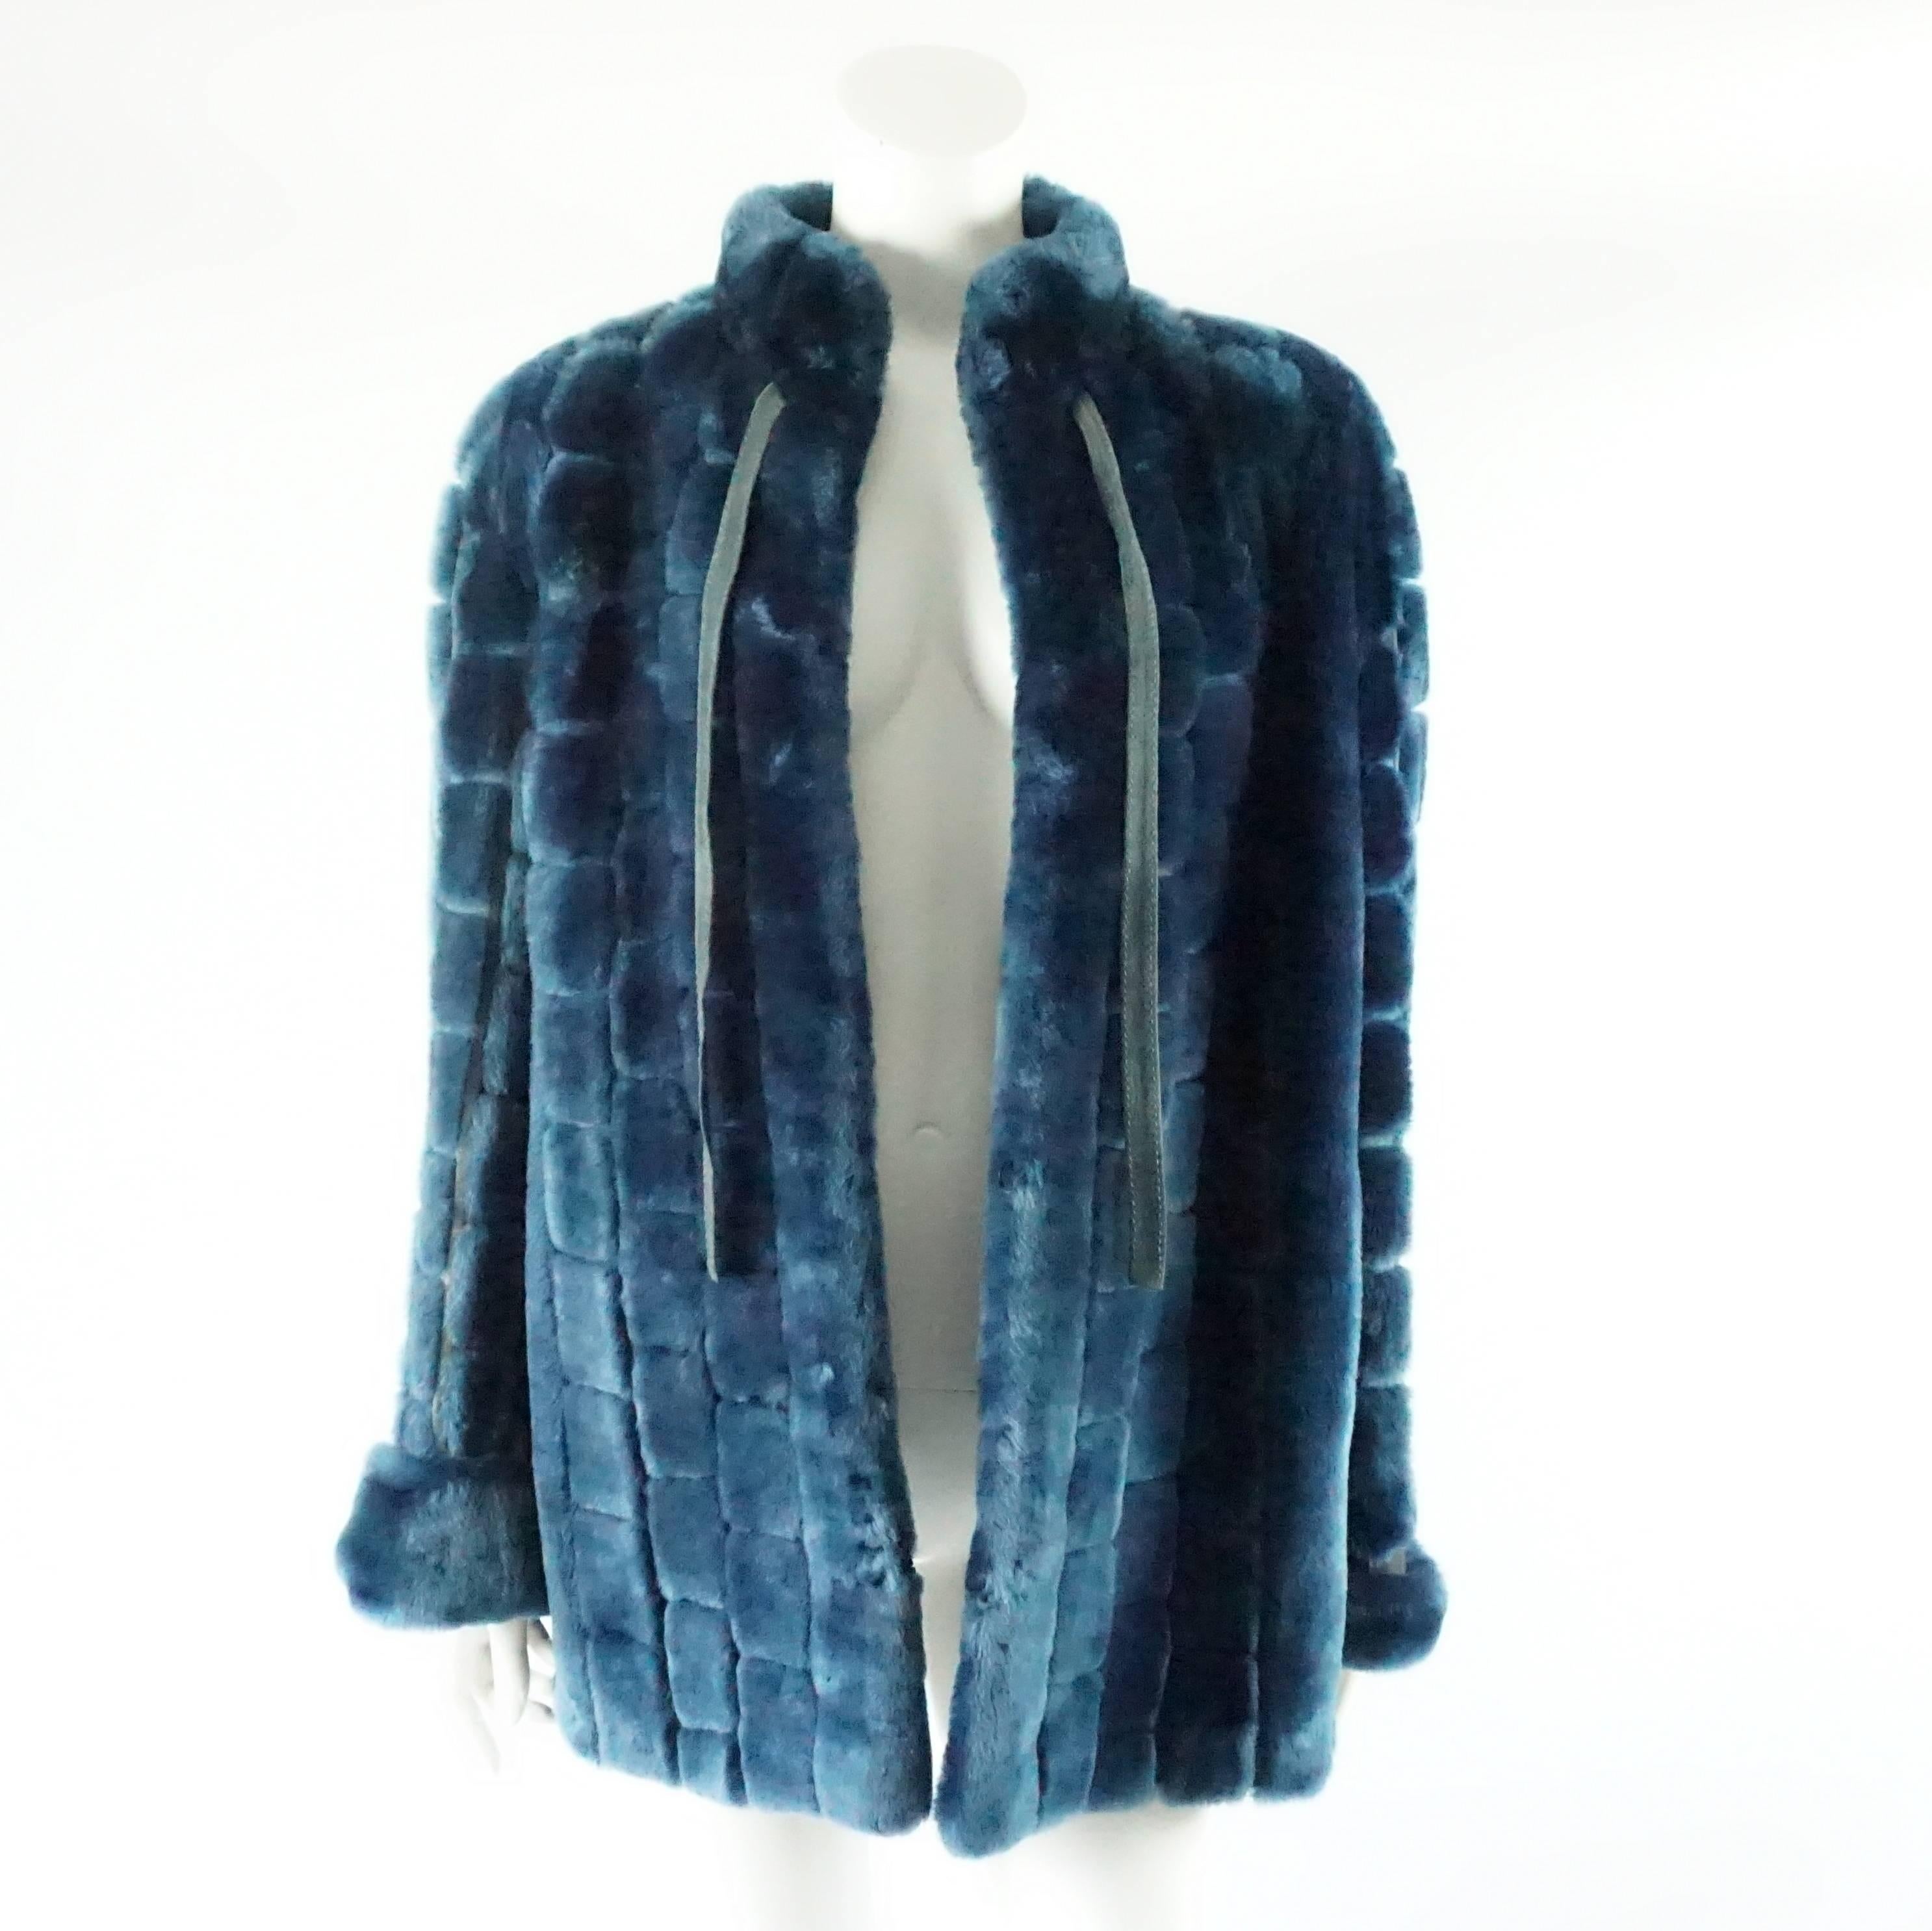 This vintage Dior blue faux fur coat has 2 front ties and hook and eye closures. The coat has square fur sections with suede in between. This coat is in fair vintage condition with some staining on the suede and some of the lining by the armpit is